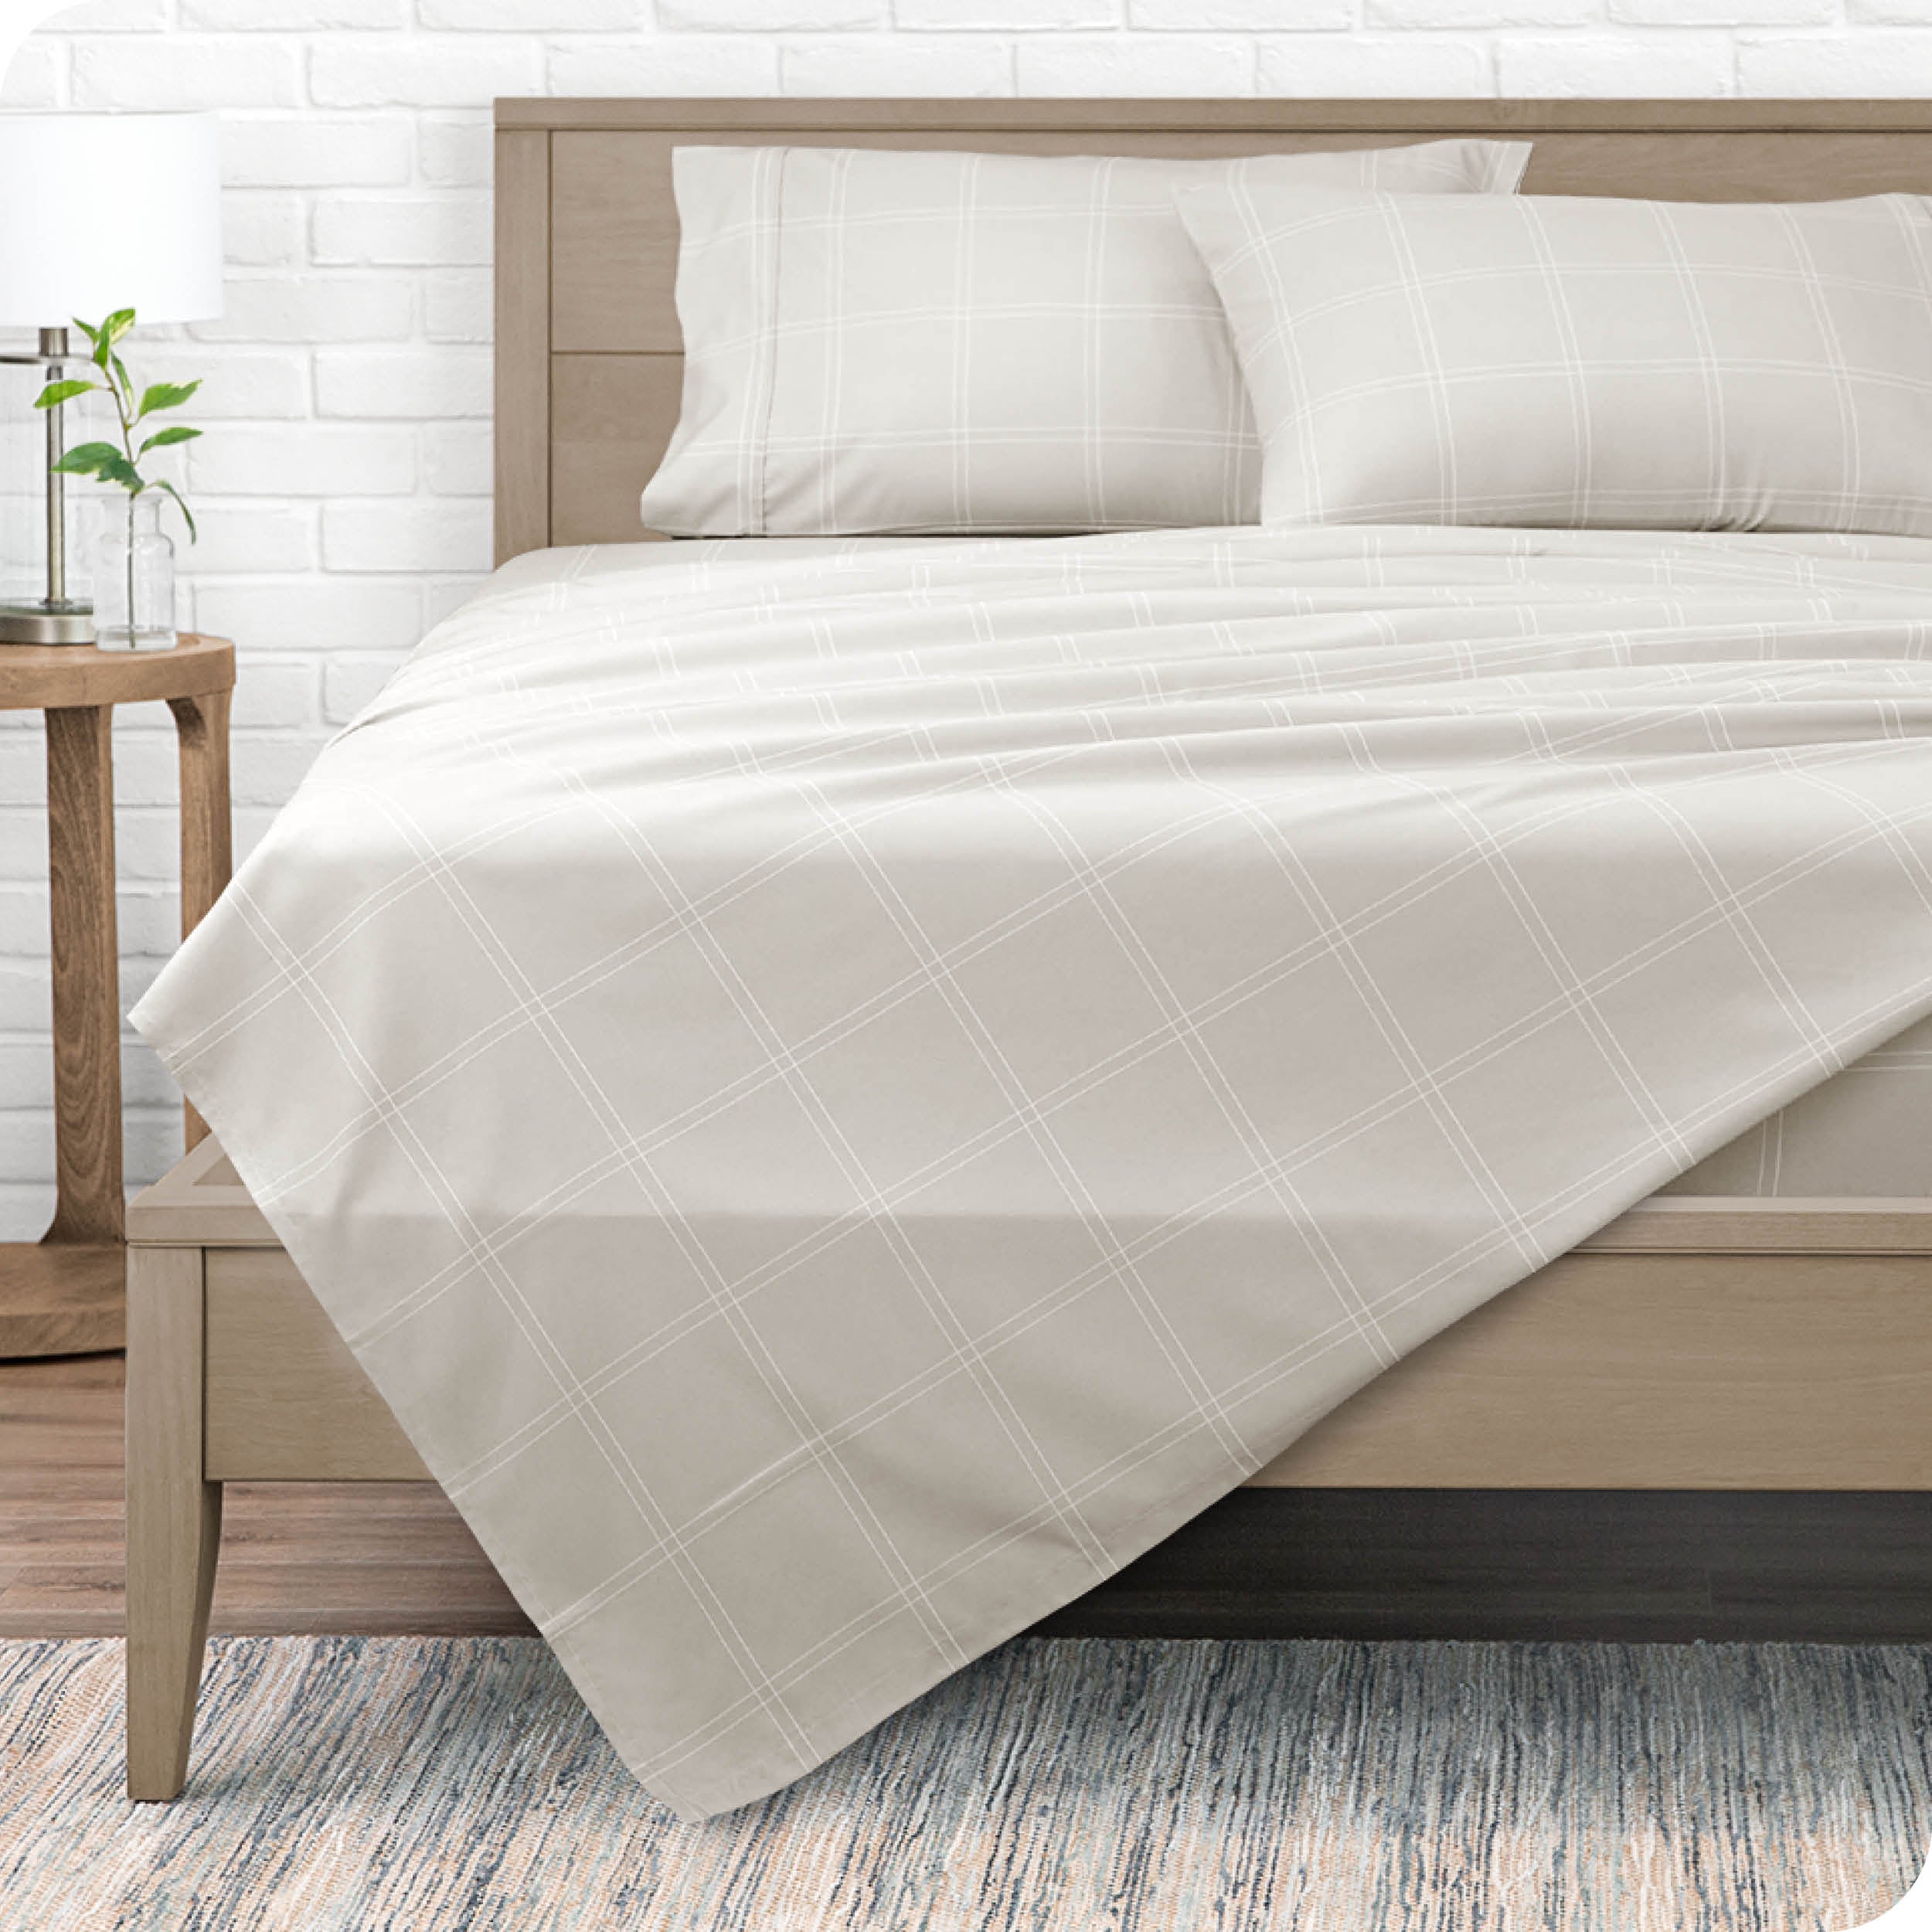 A modern bed with a microfiber sheet set on it.